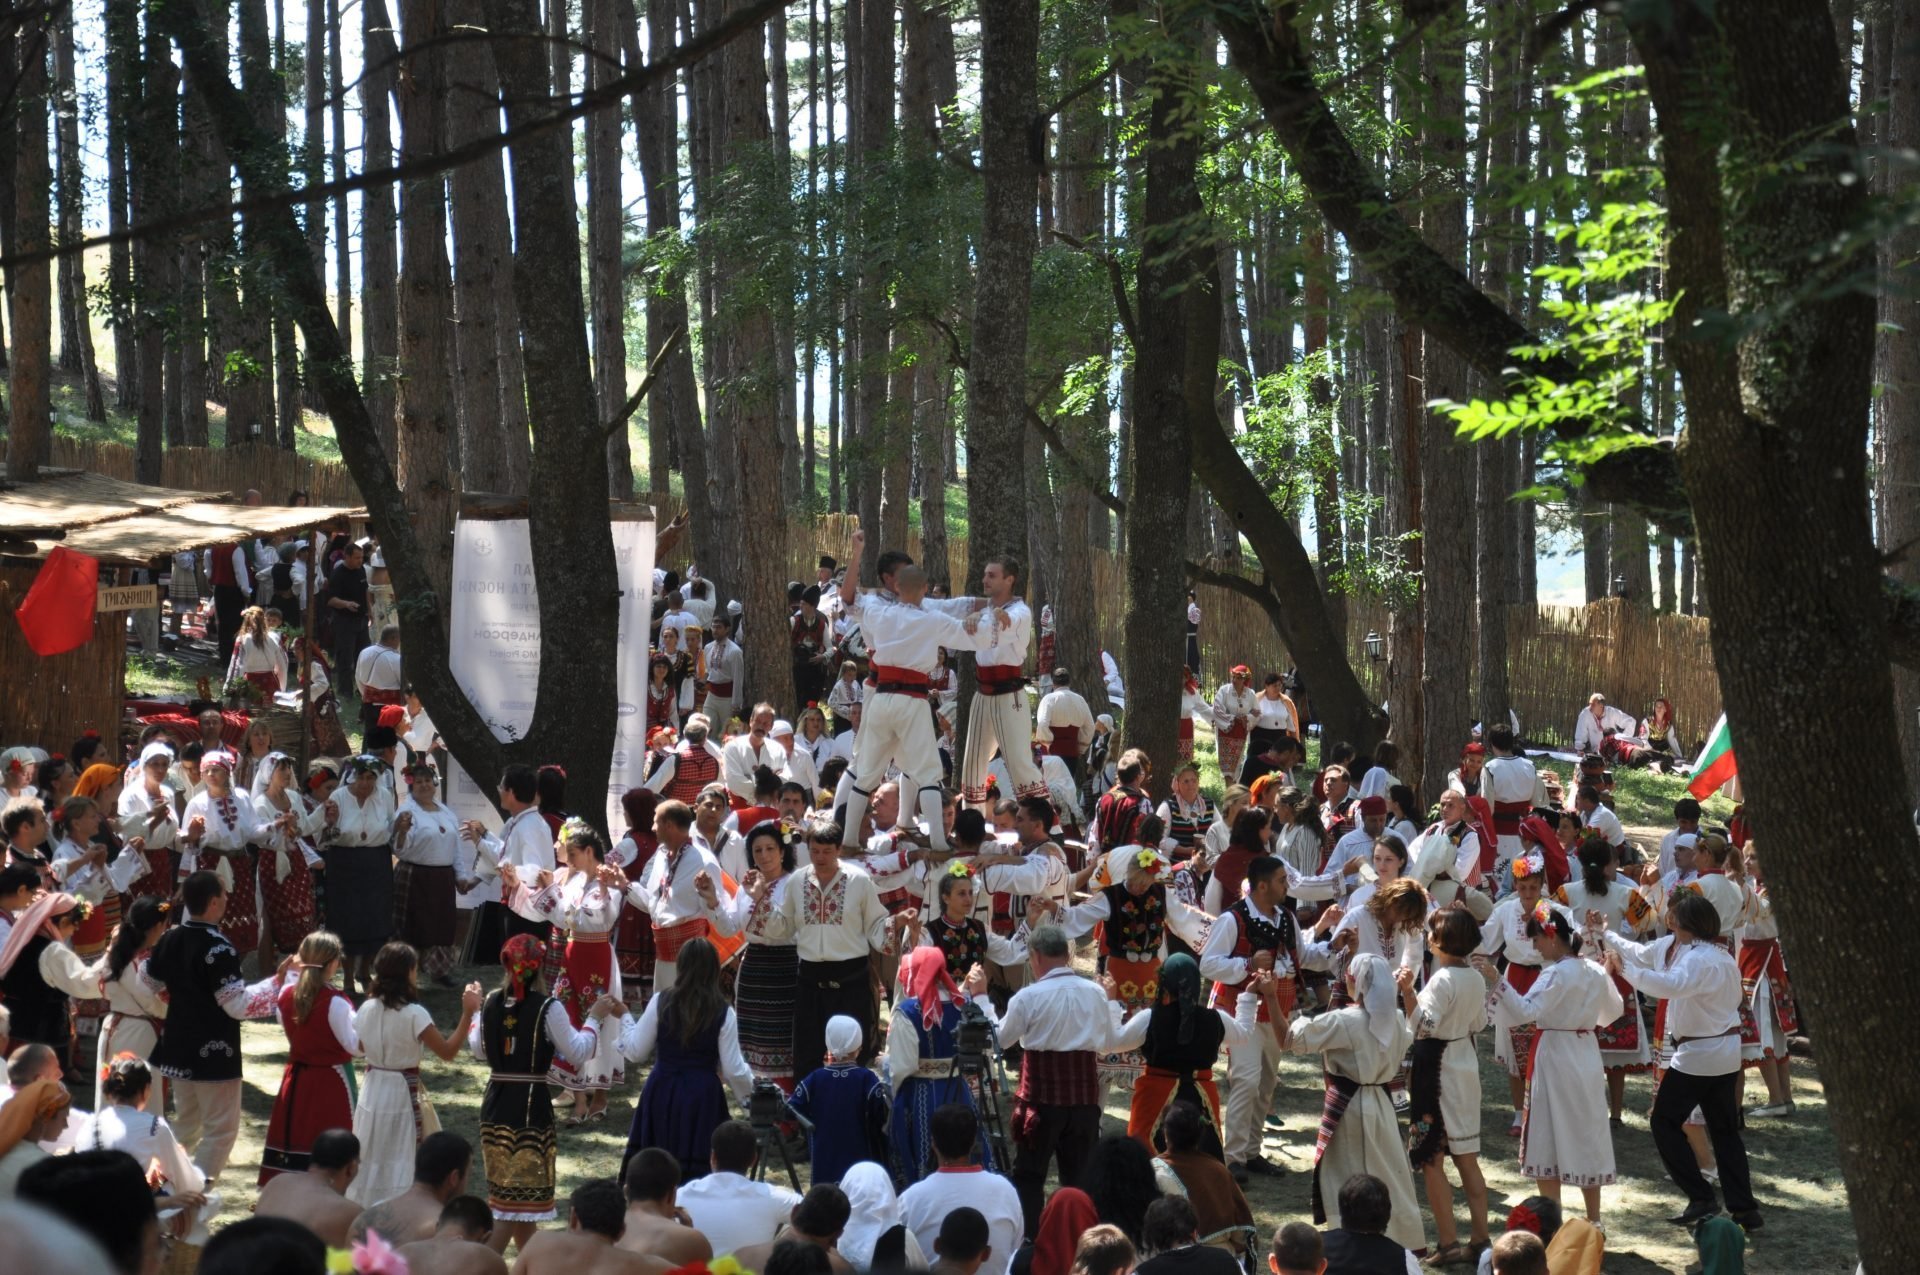 A group of people wearing white and red clothing standing together in a forest.